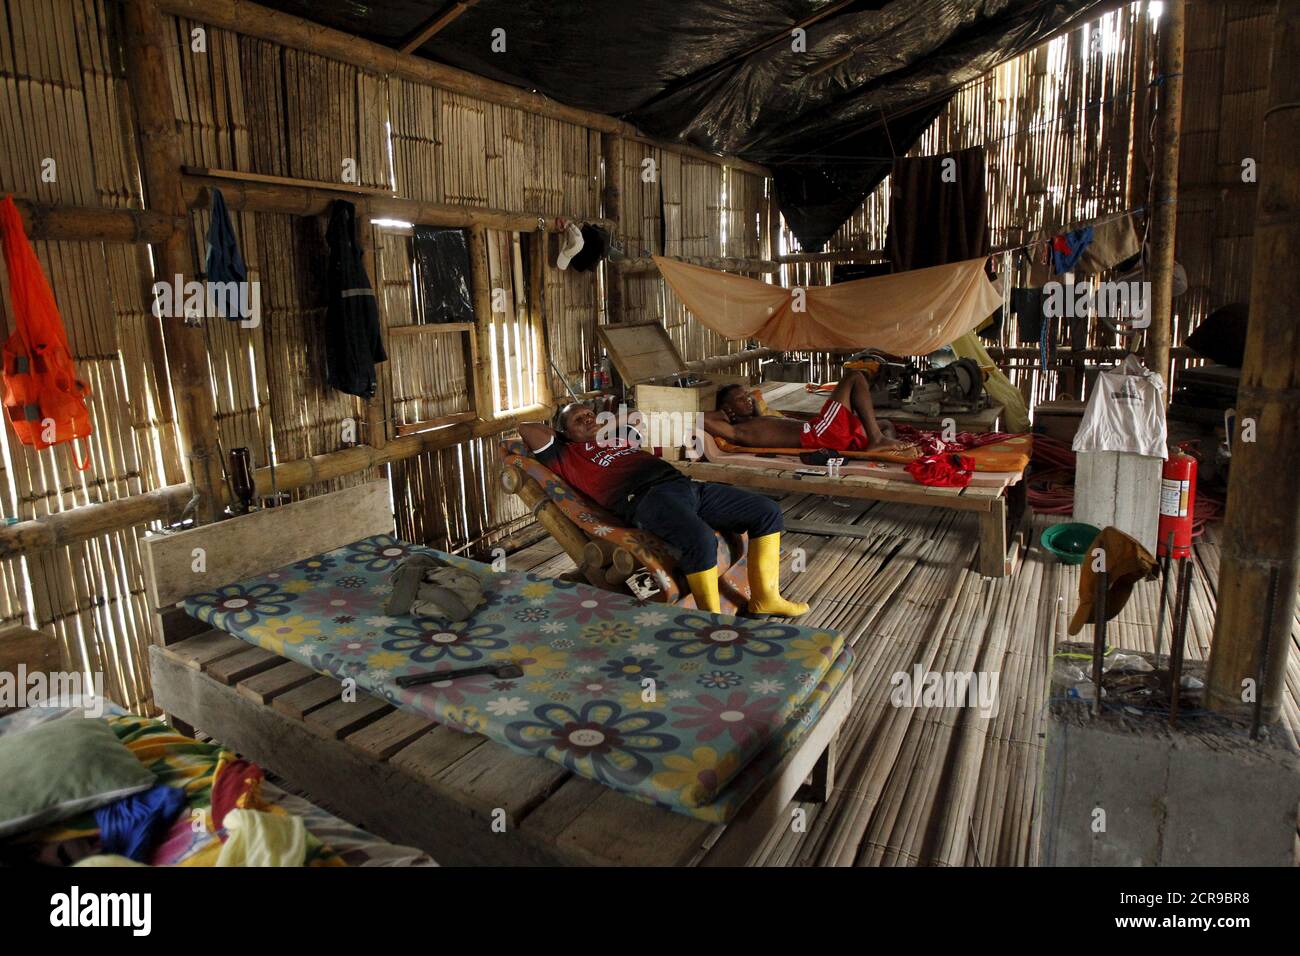 Workers of the Cofan indigenous people rest in a house in the Quichua community at Dureno, Ecuador, March 26, 2016.    REUTERS/Guillermo Granja Stock Photo